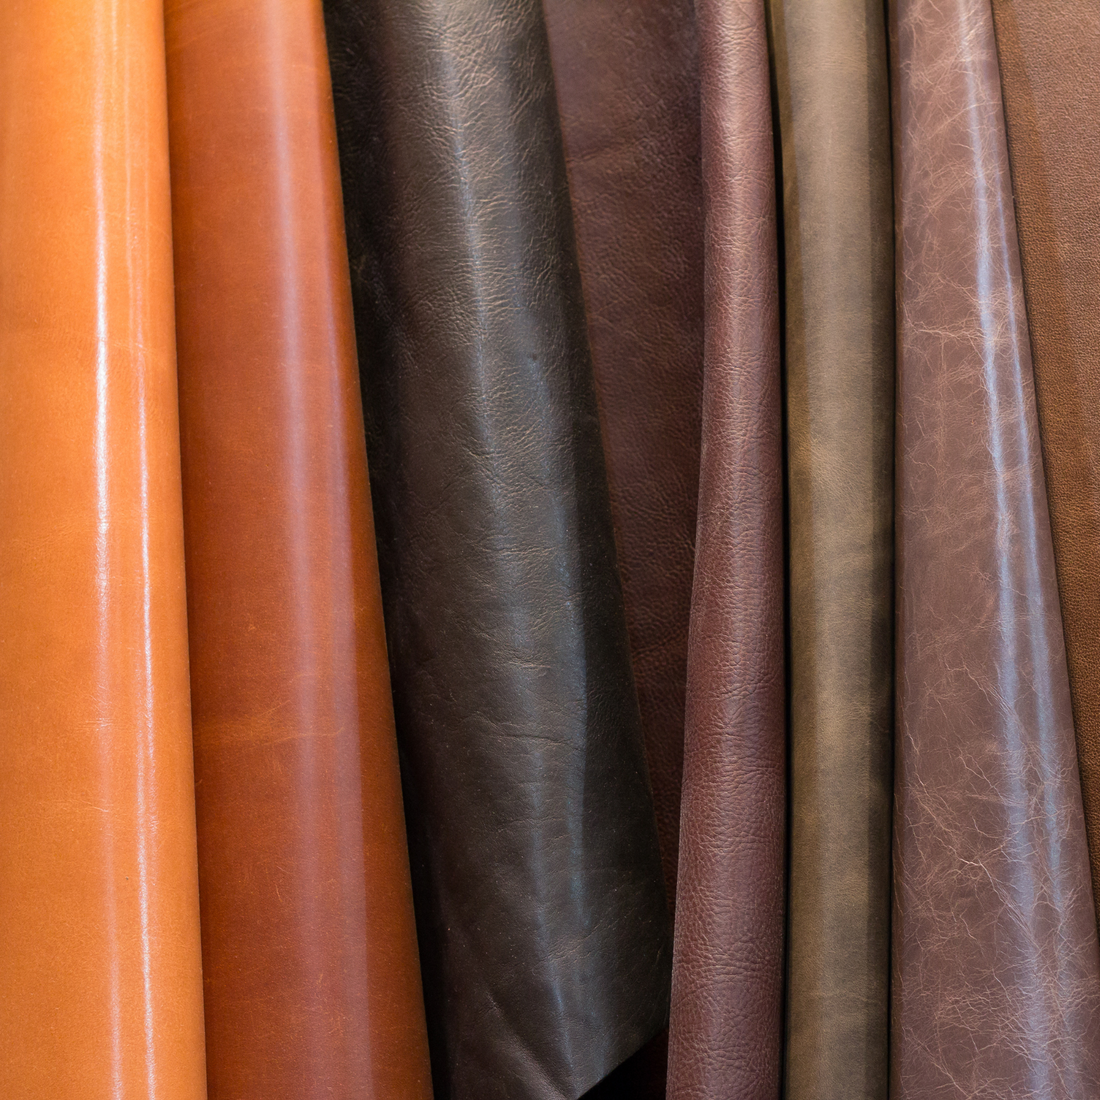 Colors of Leather Wallets - Brown Leather, Black Leather, White Leather , Red Leathter, Blue Leather and Green Leather